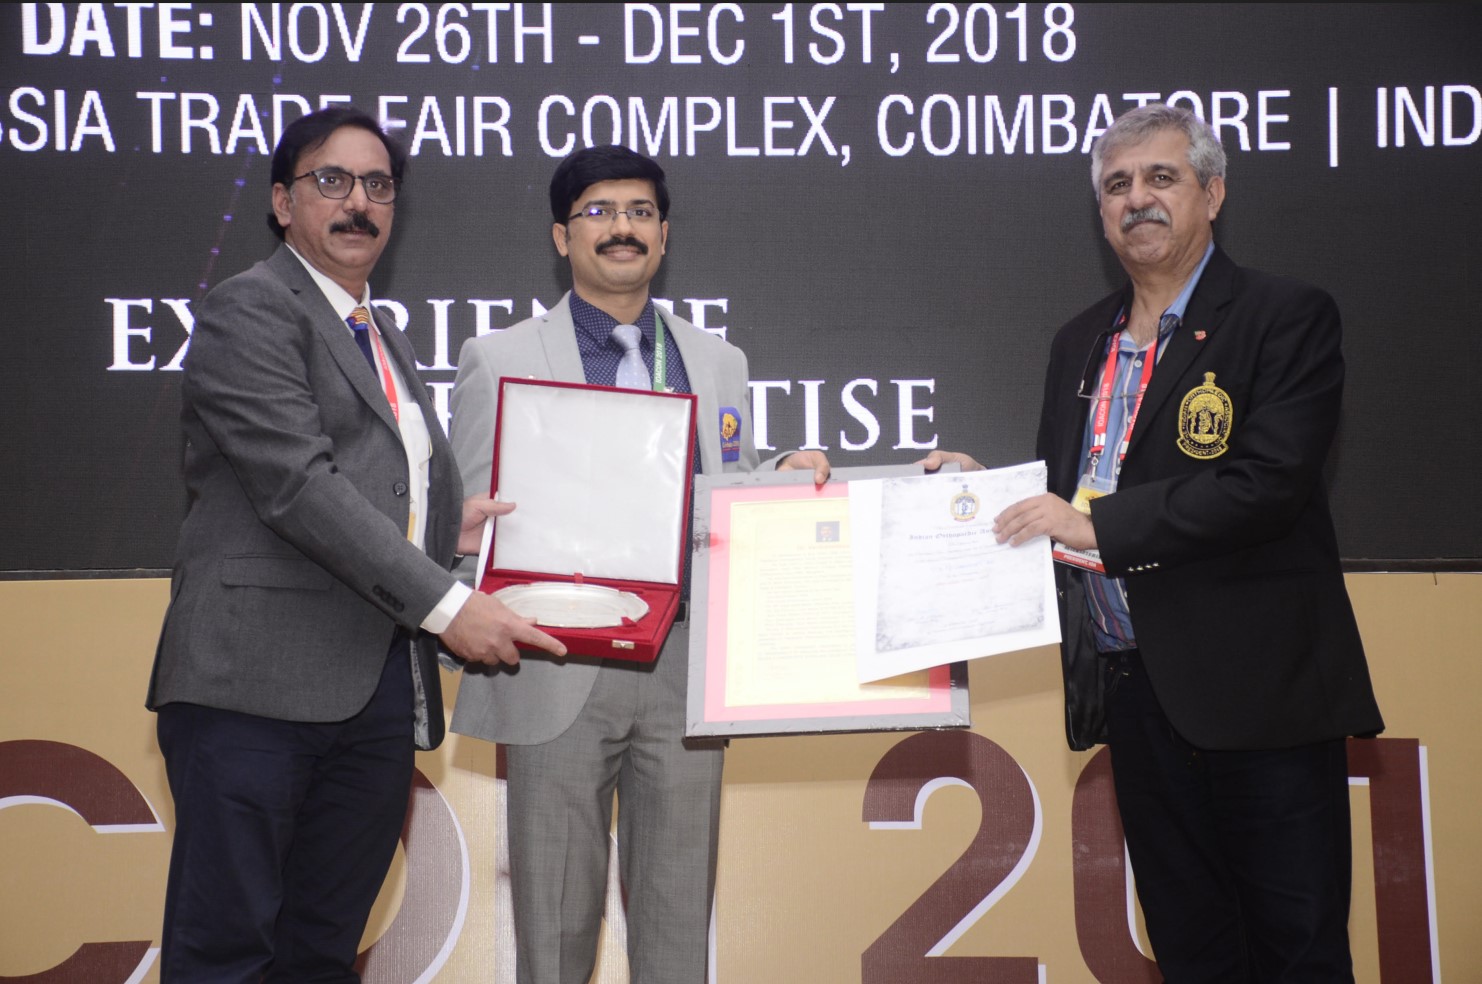 IOA - Silver Jubilee Oration 2018 - 63rd Annual Conference of  The Indian Orthopaedic Association, Coimbatore